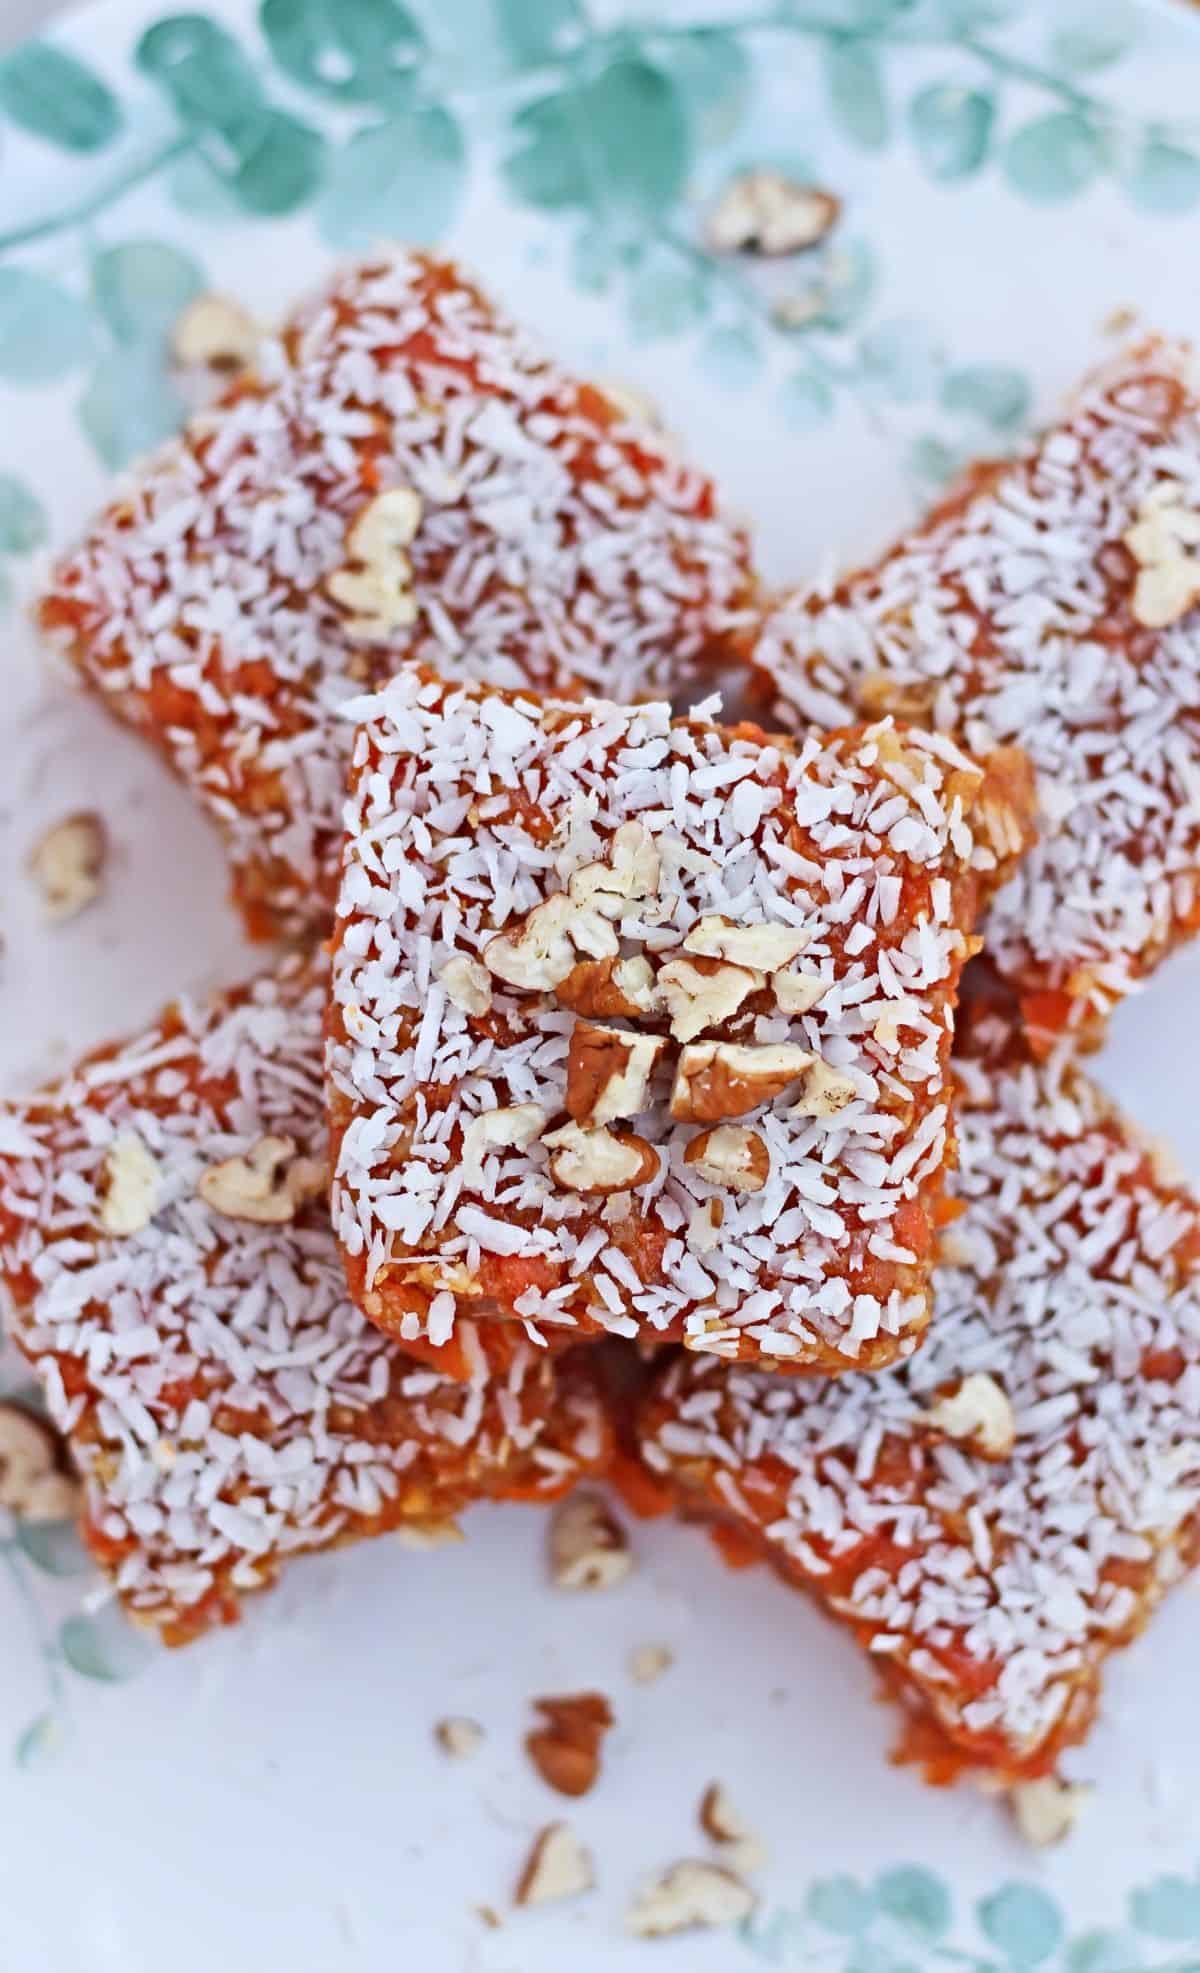 Cezerye slices in a plate garnished with coconut and nuts